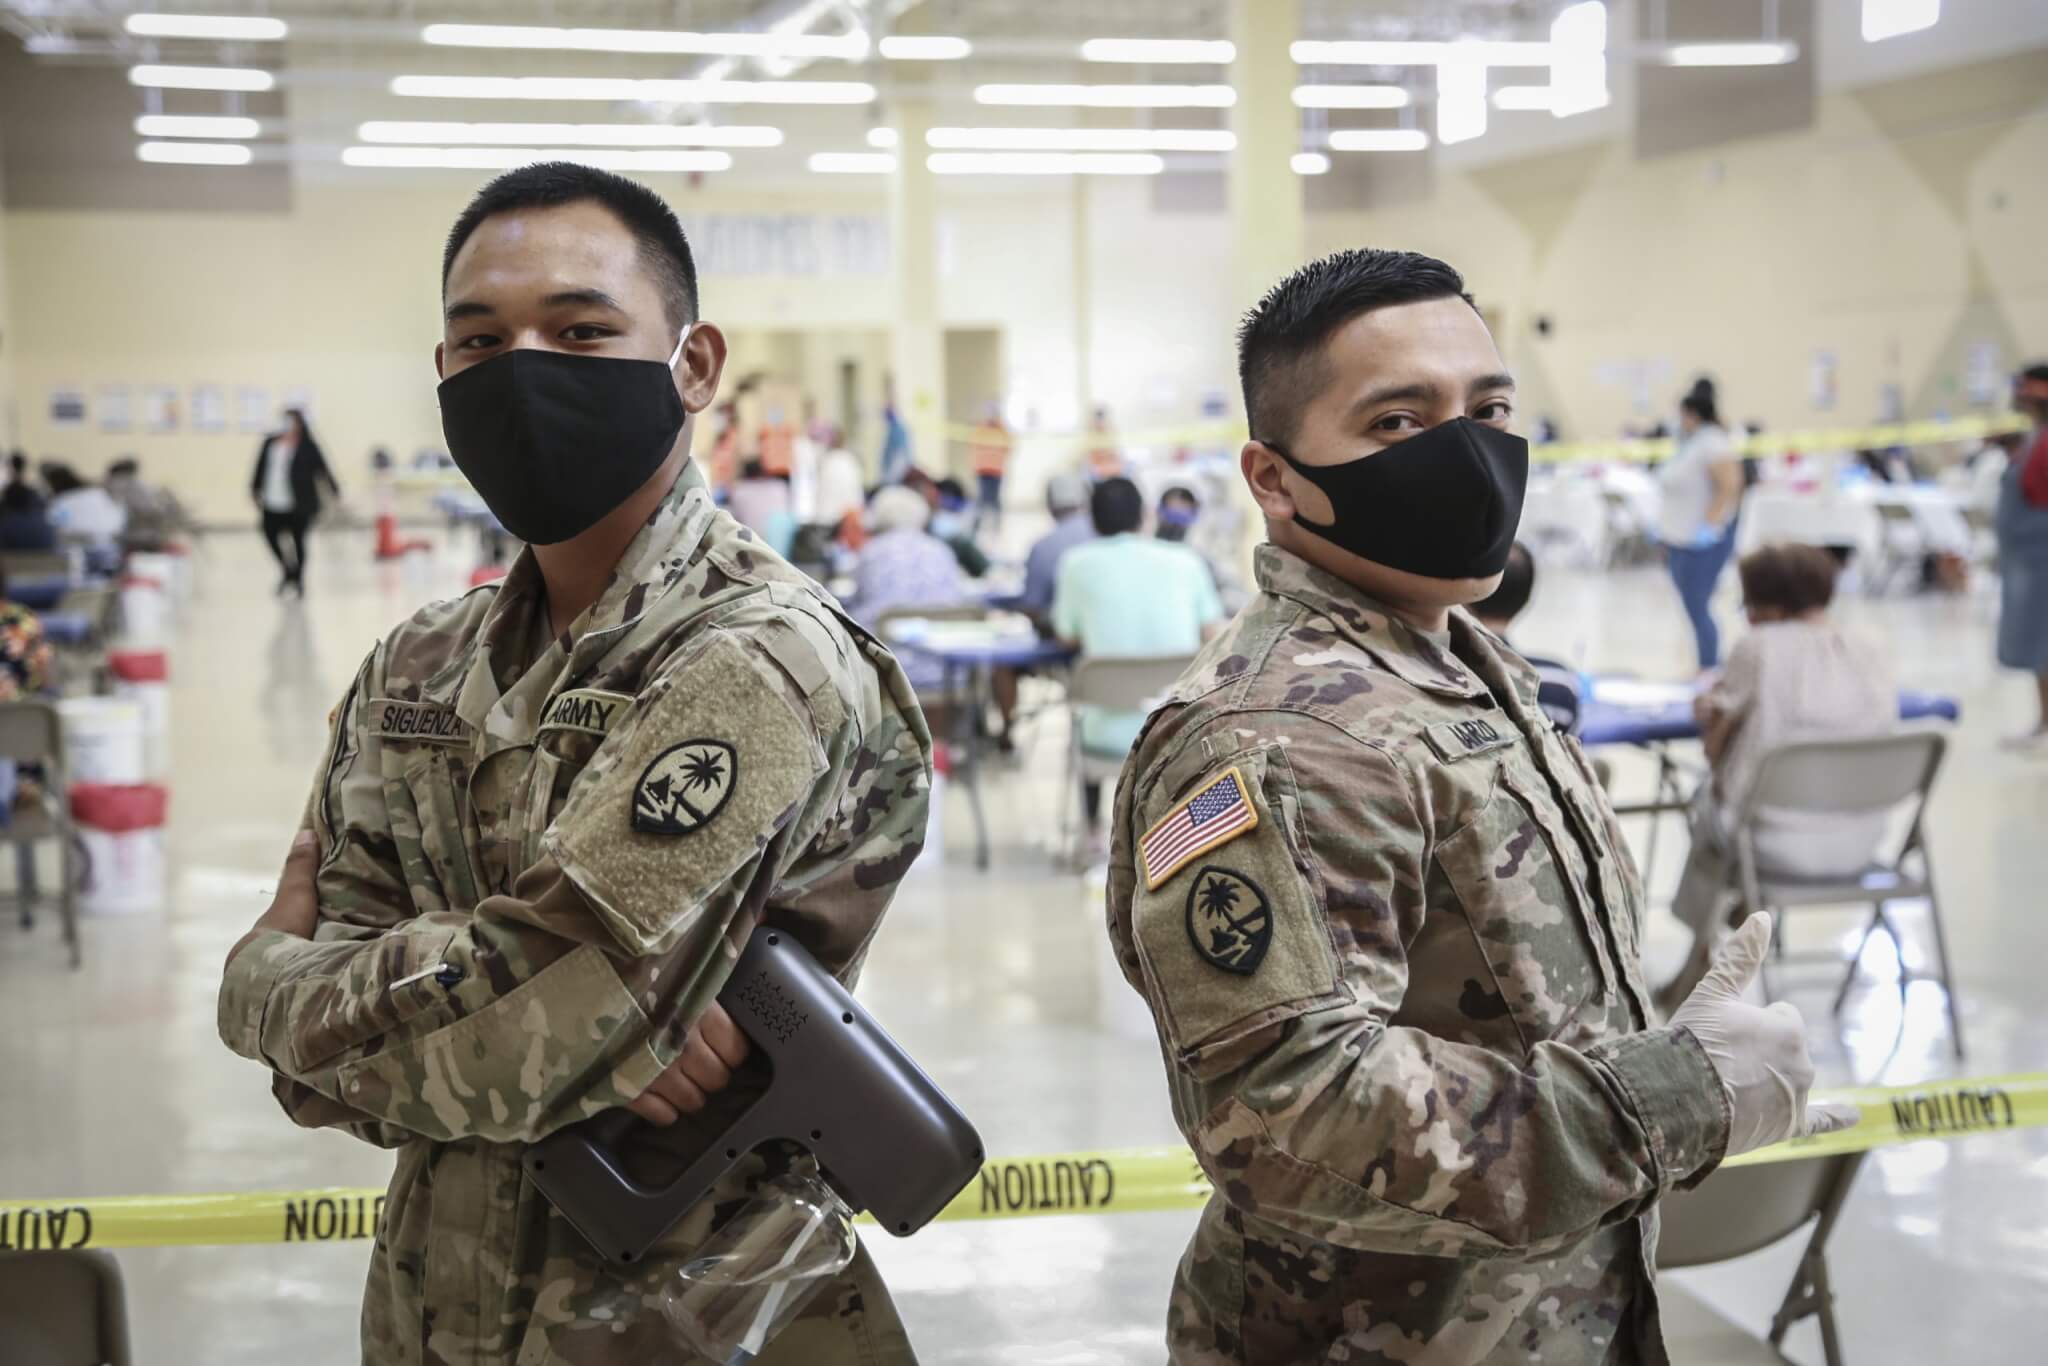 Pvt. 1st Class Shane Siguenza, left, and Spc. Christian Marzo of the Guam National Guard assist with traffic flow and sanitation at the COVID-19 vaccination site in Dededo.